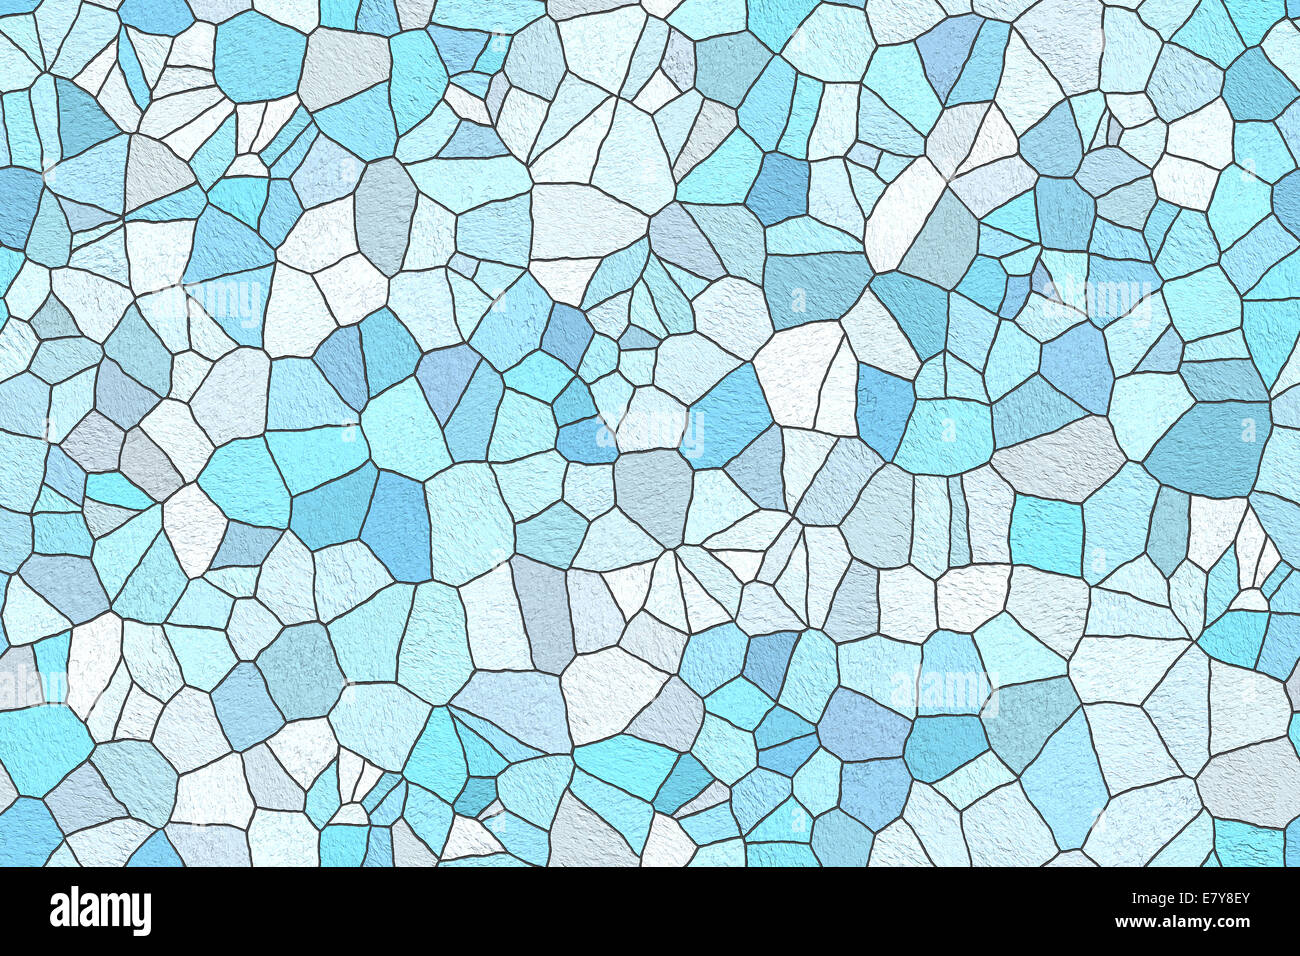 Raster illustration of a pastel blue crushed stained glass mosaic surface for use as a background Stock Photo